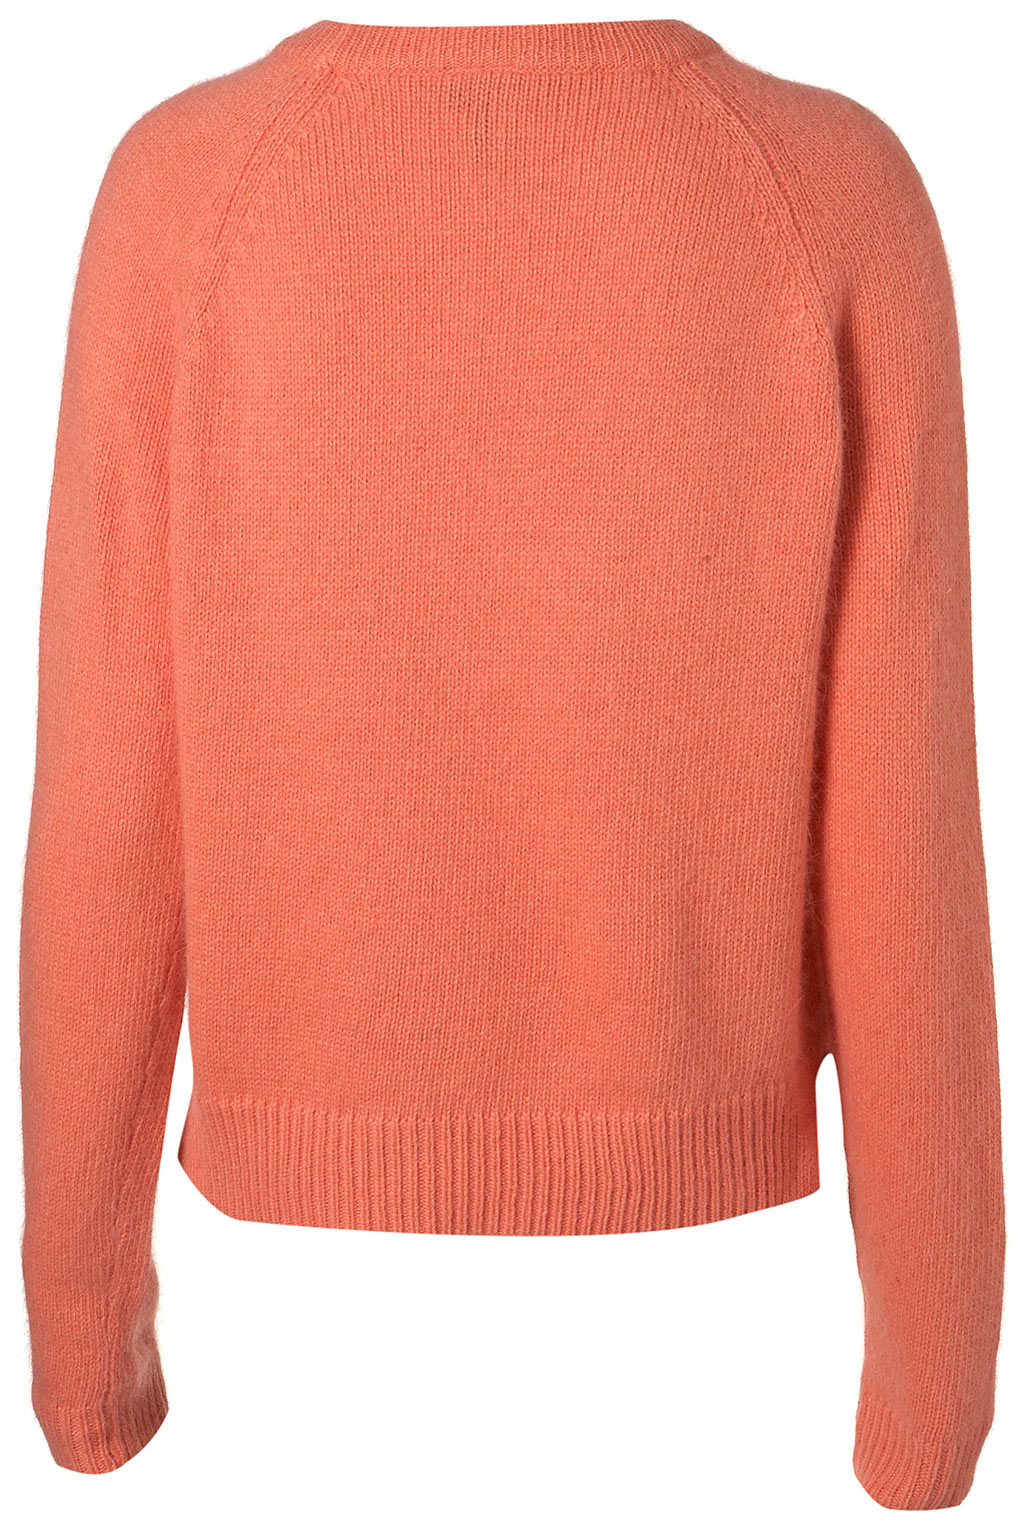 Lyst - Topshop Knitted Fluffy Jumper in Pink